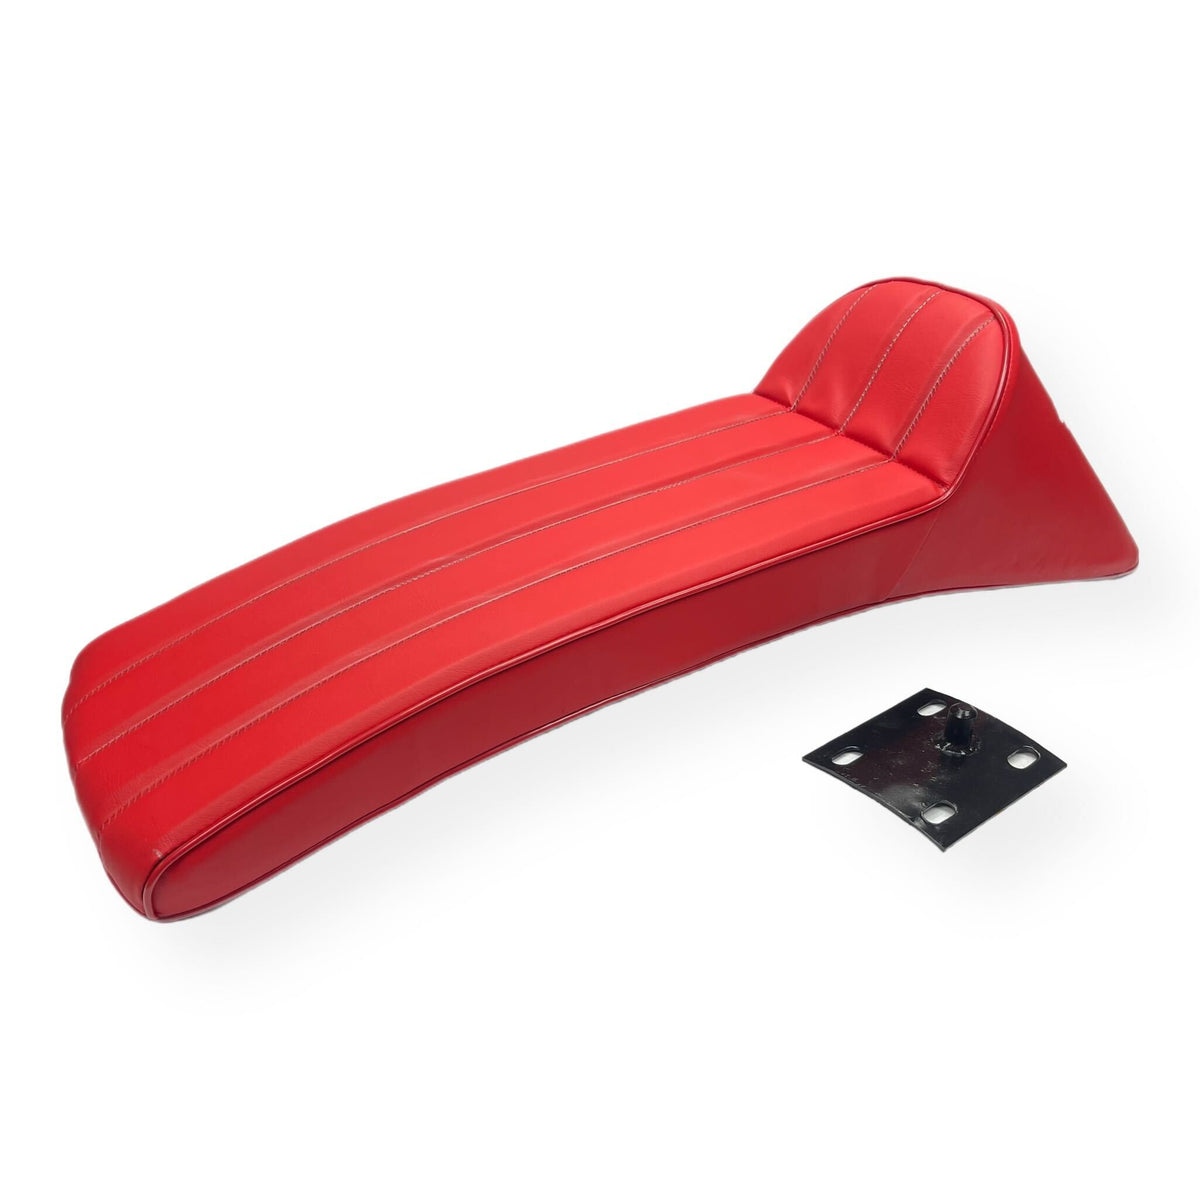 Lambretta Series 1 2 3 Ancillotti Extra-long Slope Back Gori Style Seat with Logo - Red with White Logo